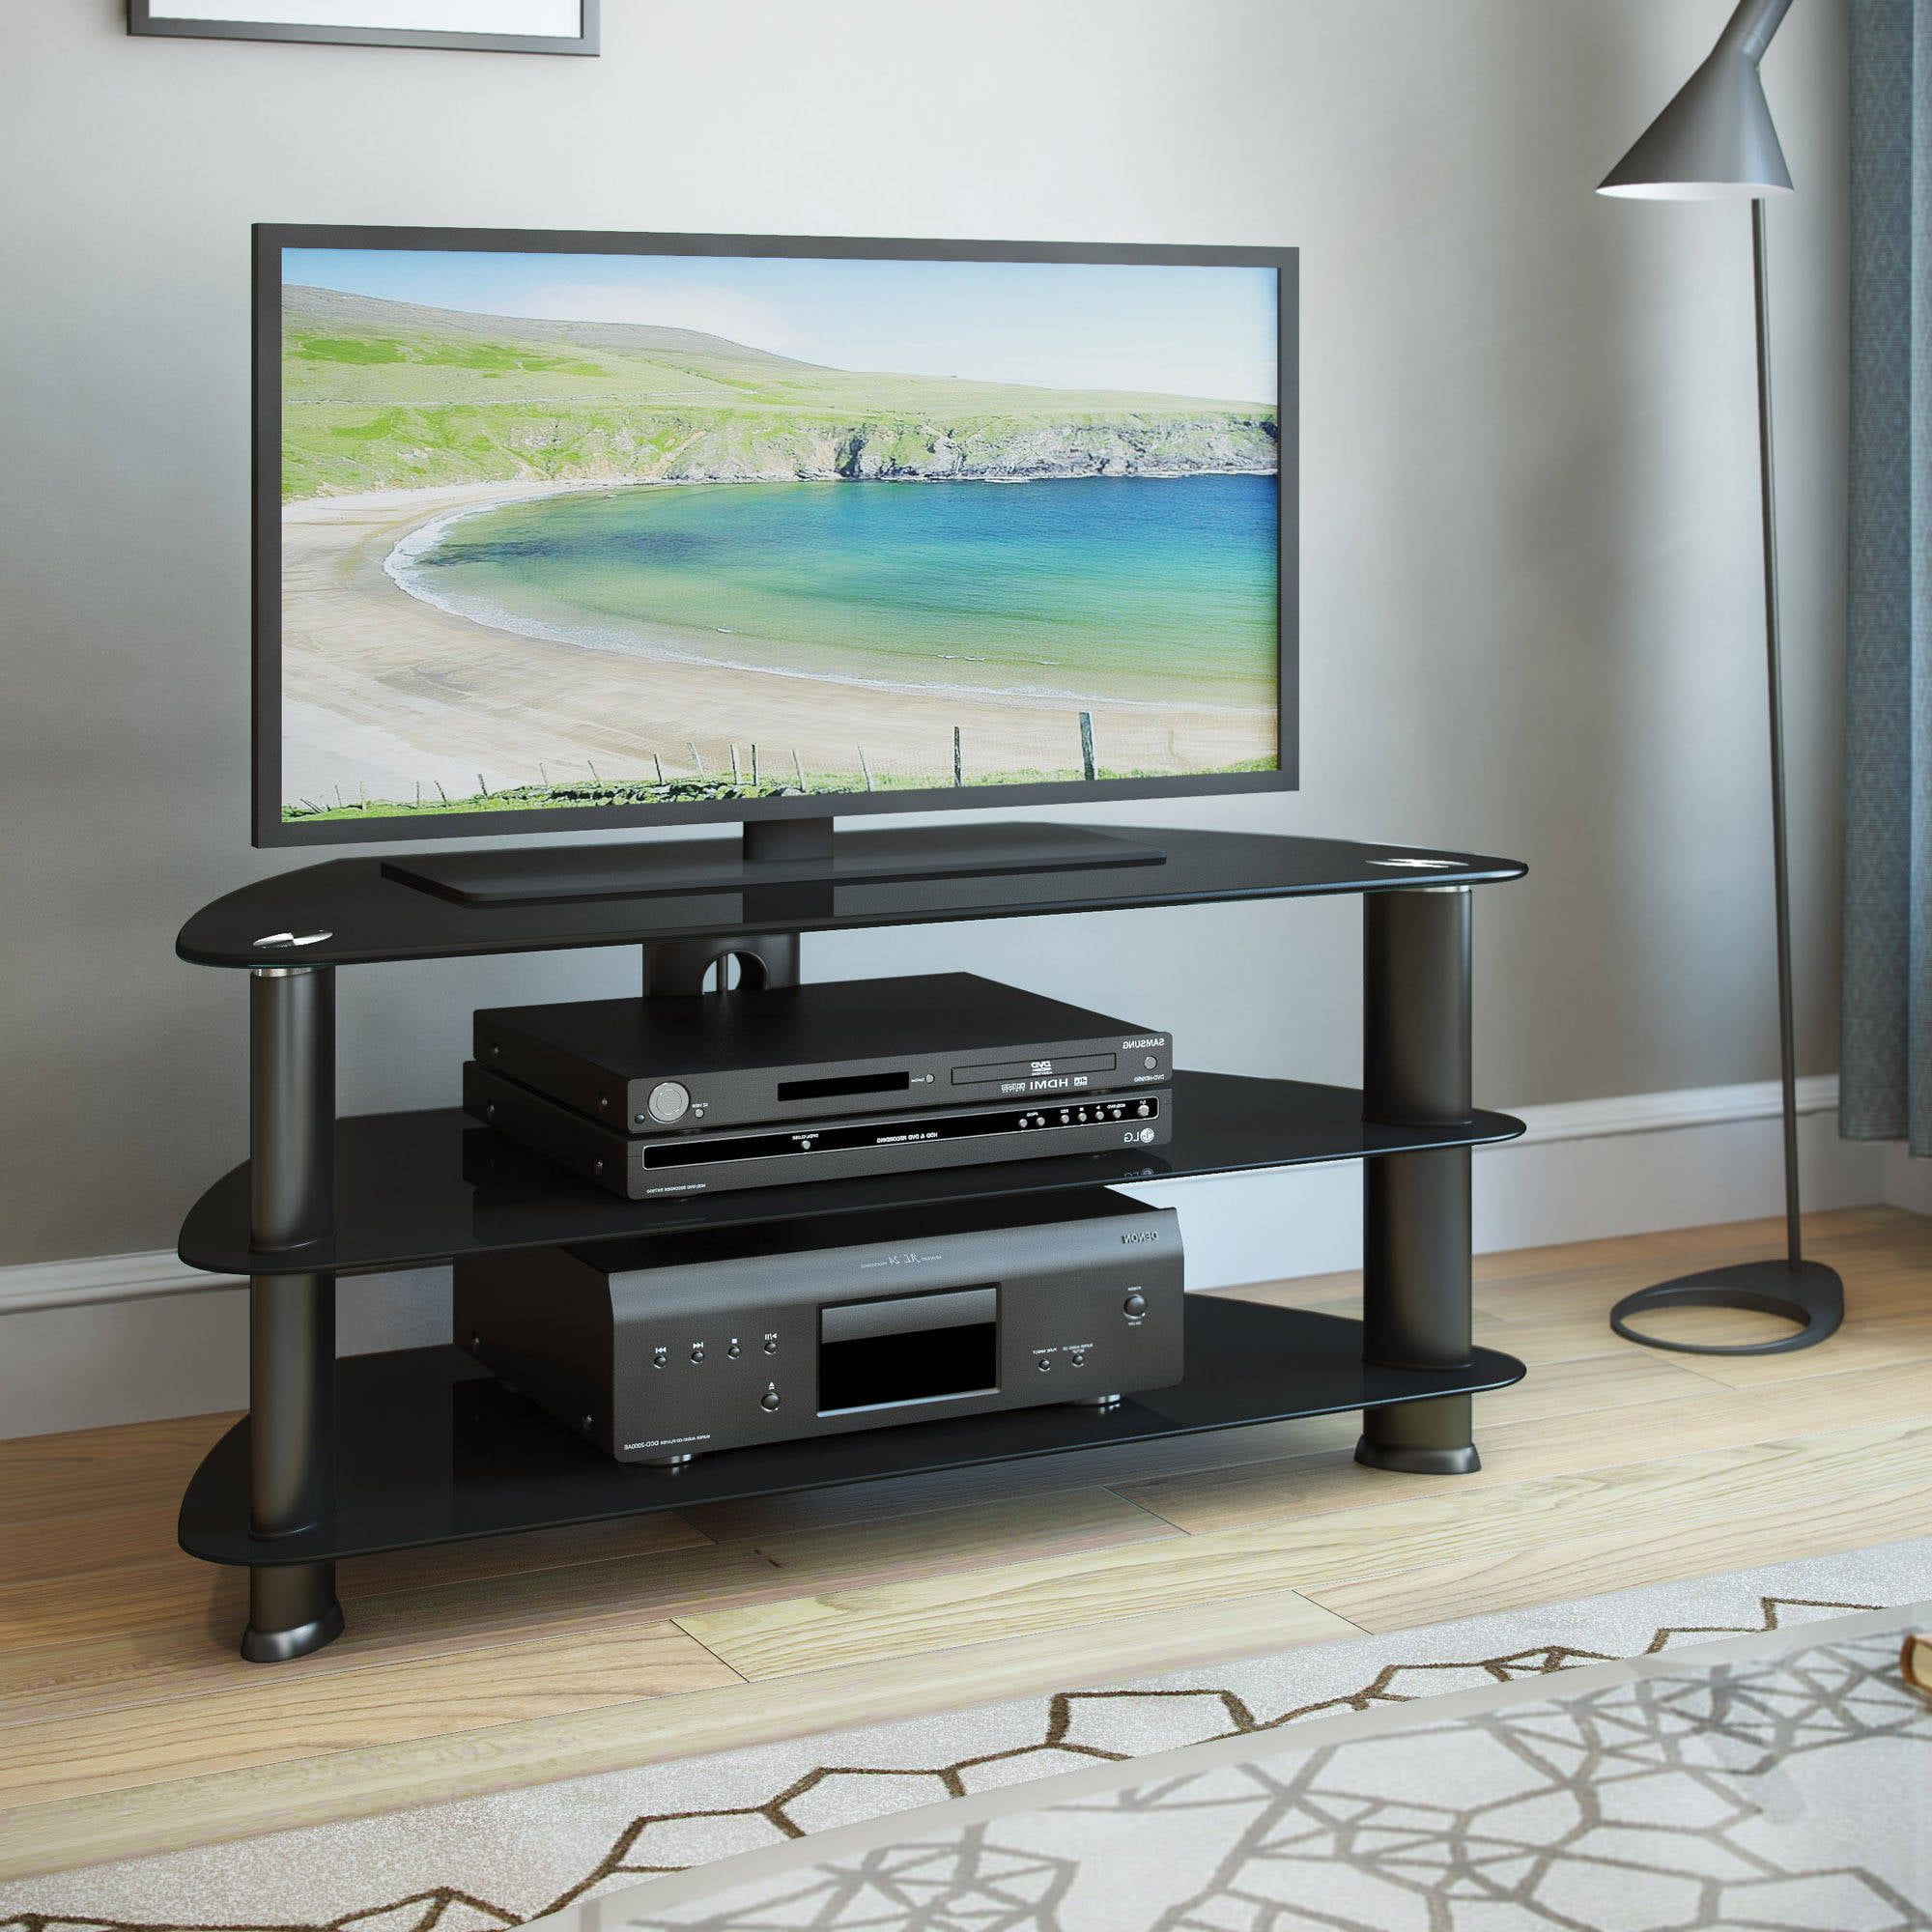 Widely Used Black Marble Tv Stands Inside Laguna Satin Black Corner Tv Stand For Tvs Up To 50" – Walmart (View 14 of 15)